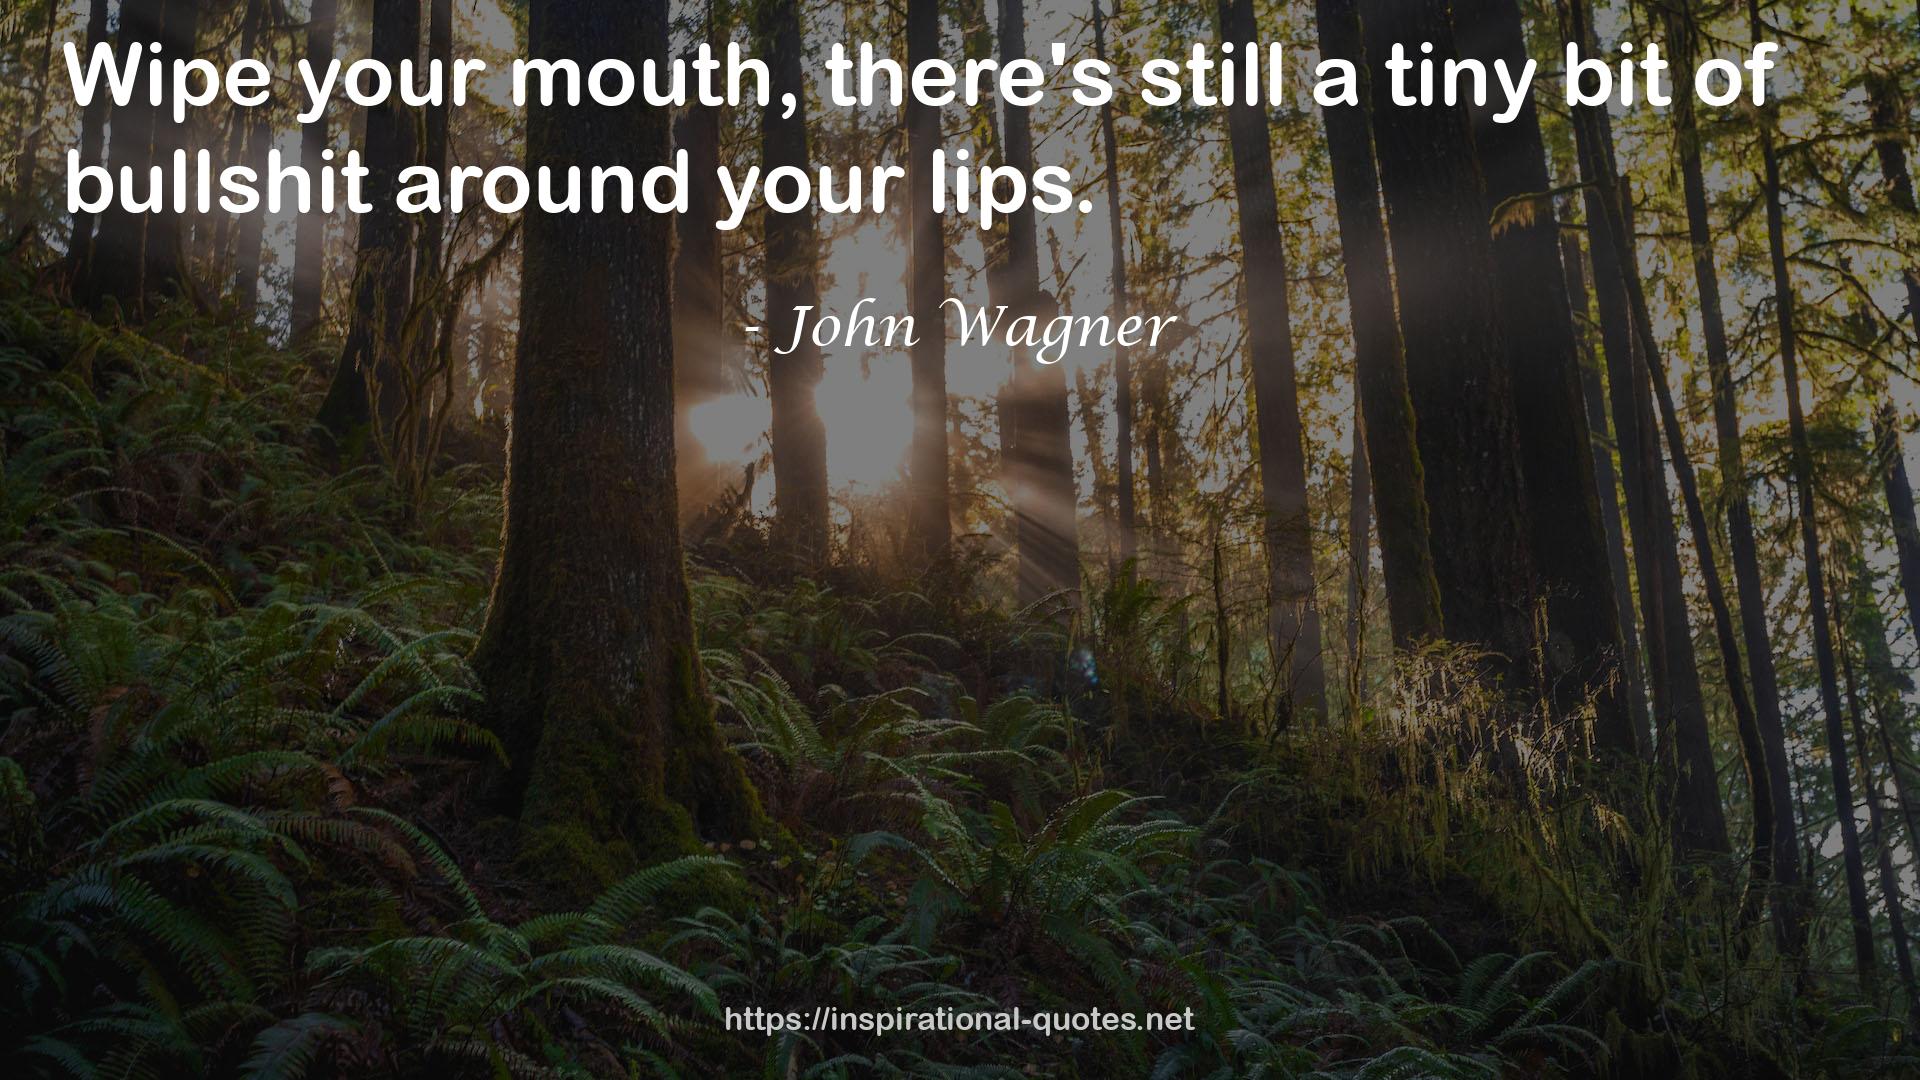 John Wagner QUOTES